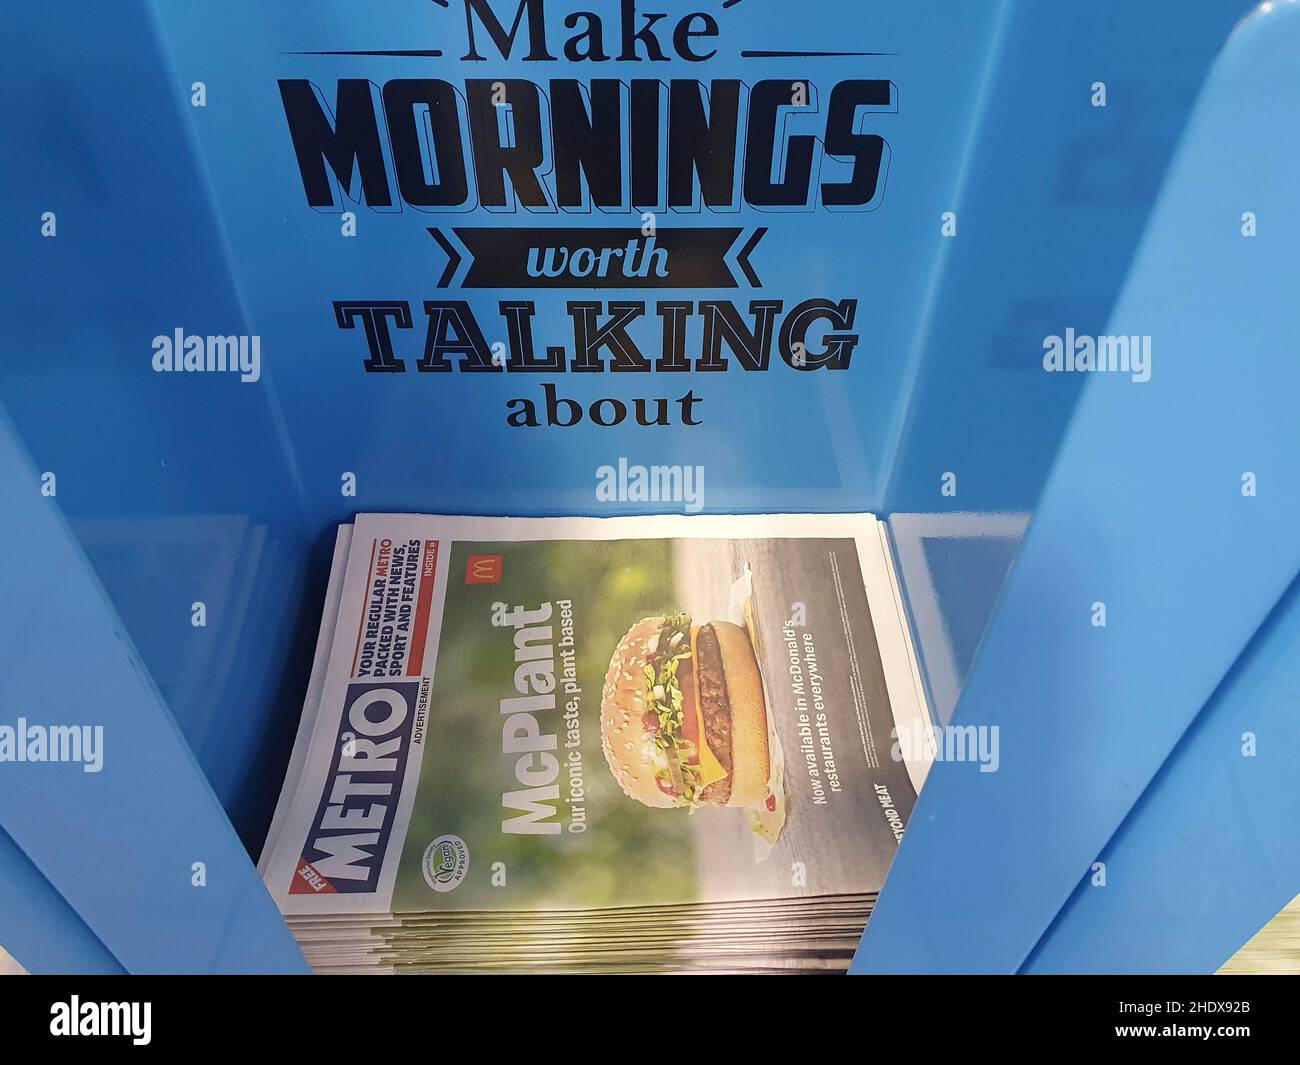 London, UK, 5 January 2021: McDonald's have paid for their McPlant advert to be wrapped around the Metro free newspaper for morning commuters. The vegan burger is being offered for Veganuary, a popular scheme which encourages people to give up animal products for one month for both personal health and the good of the planet. Anna Watson/Alamy Stock Photo